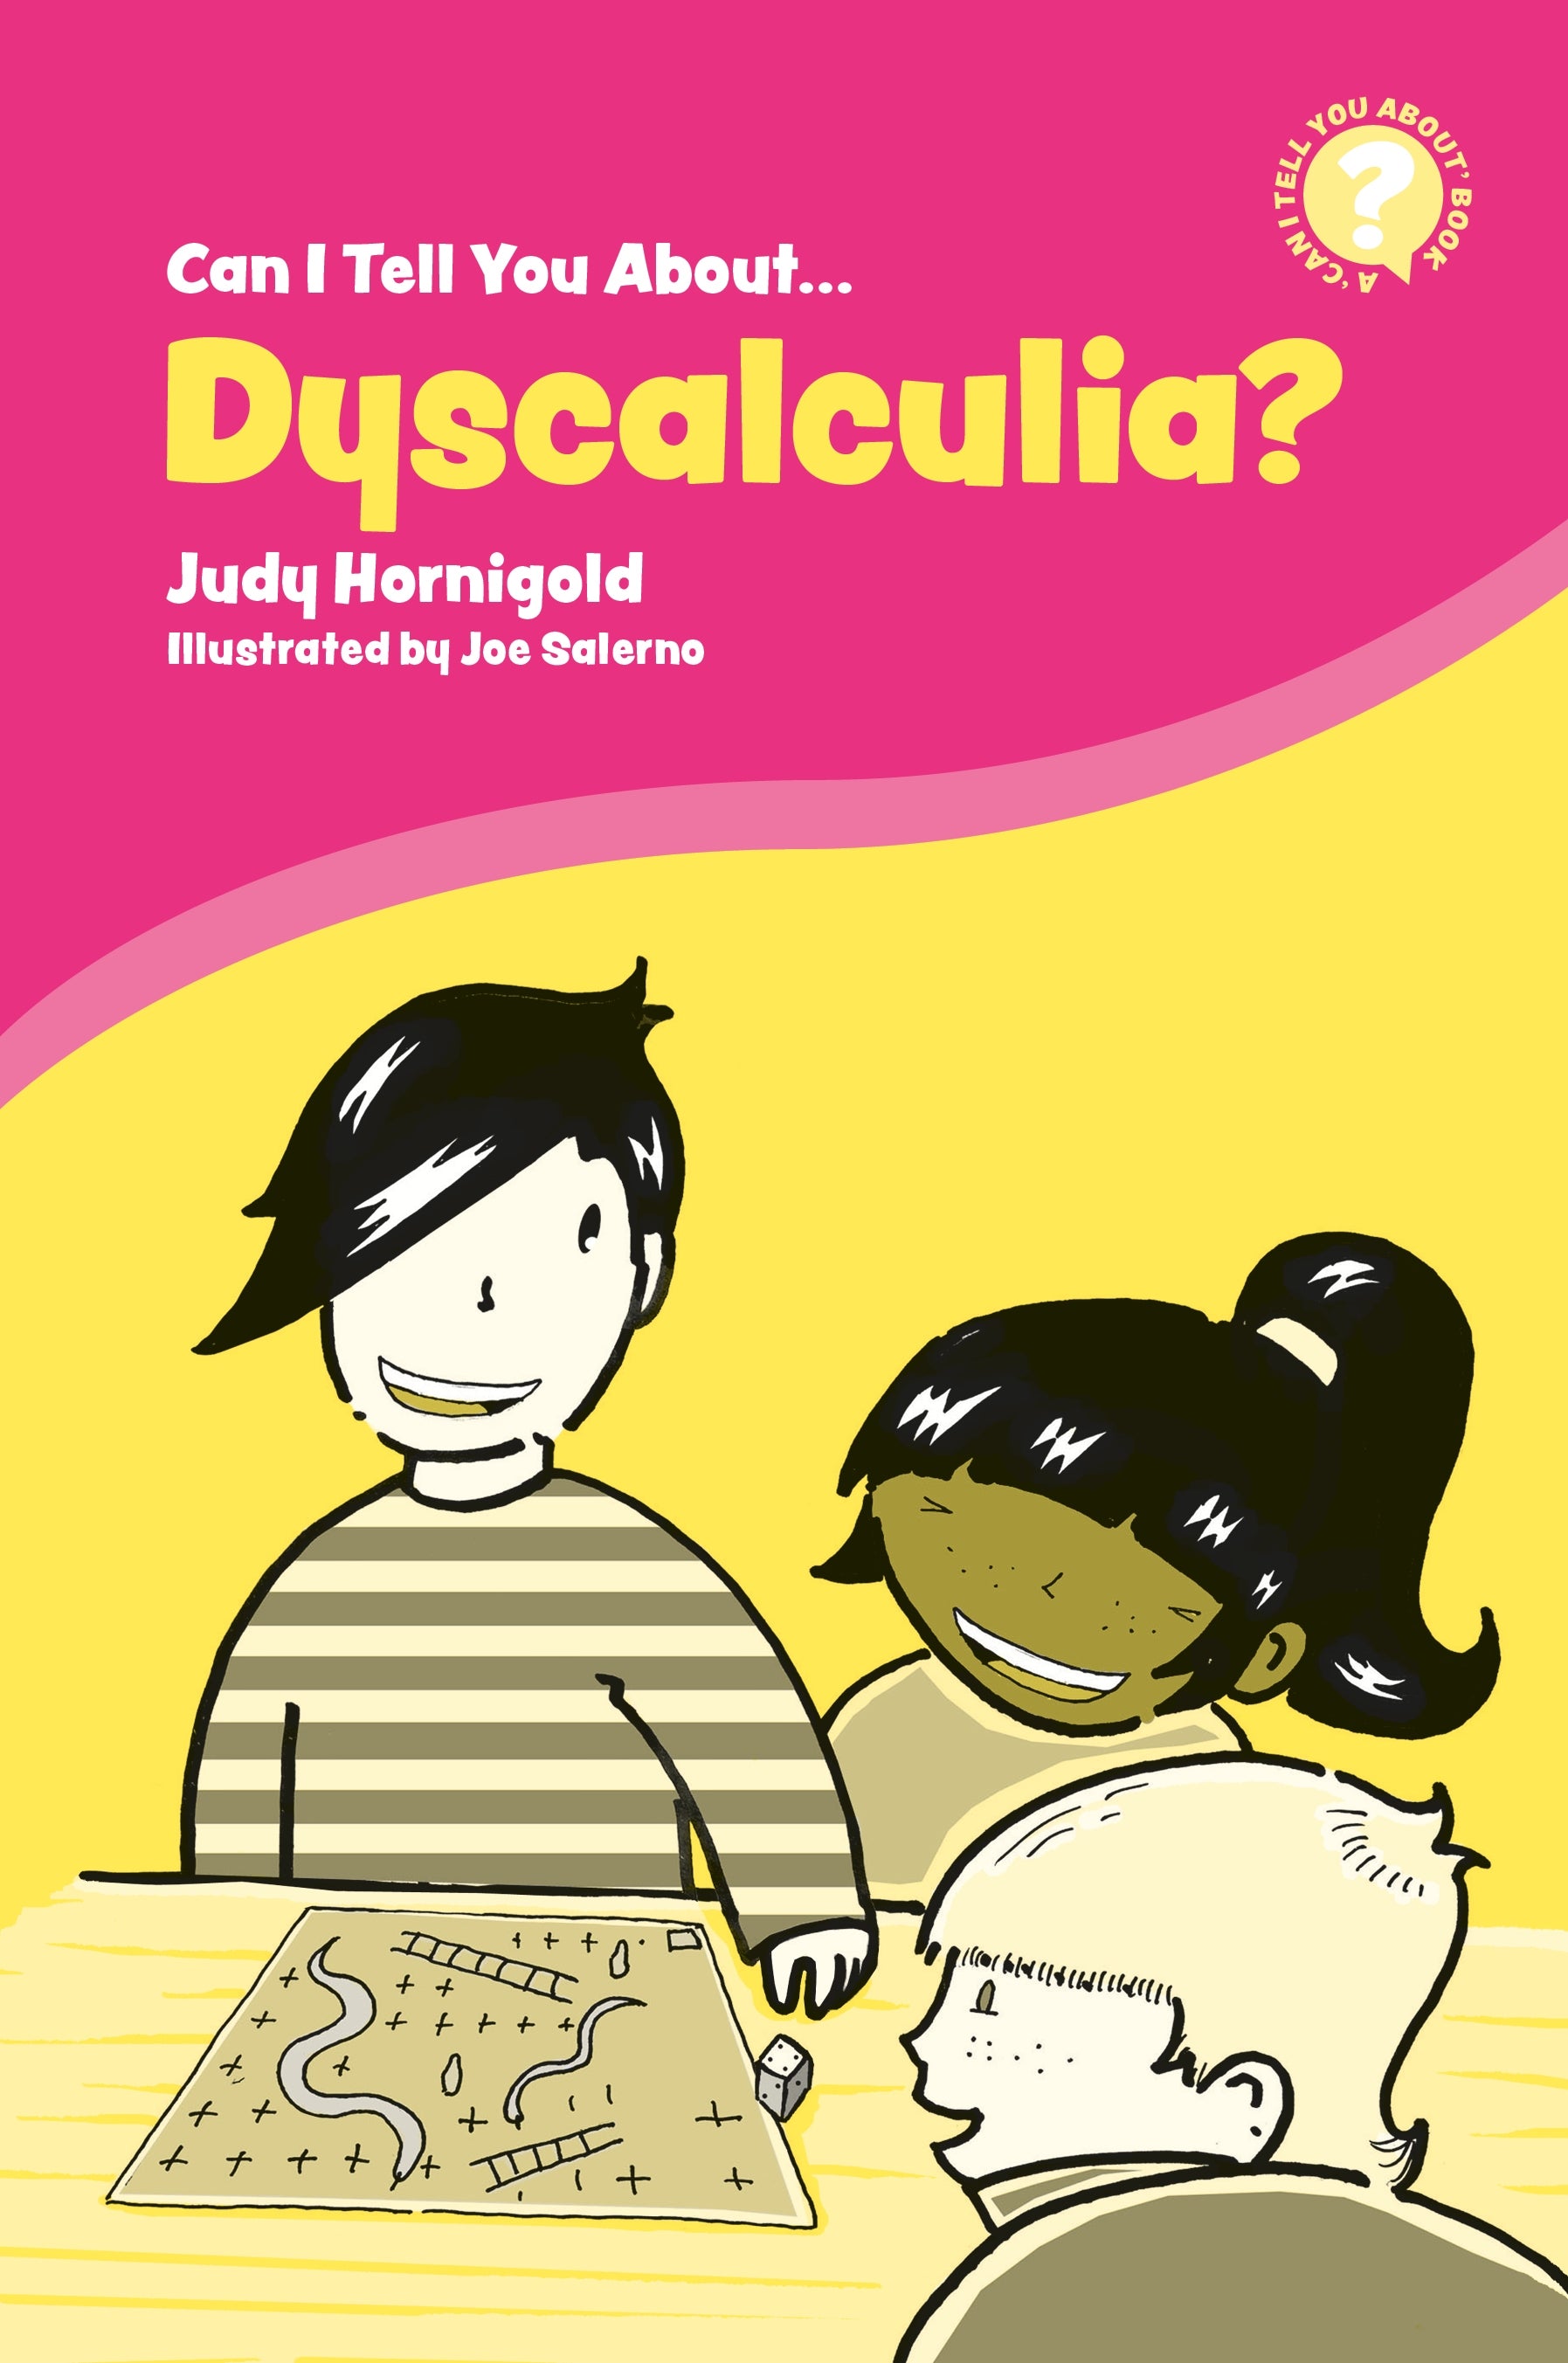 Can I Tell You About Dyscalculia? by Judy Hornigold, Joe Salerno